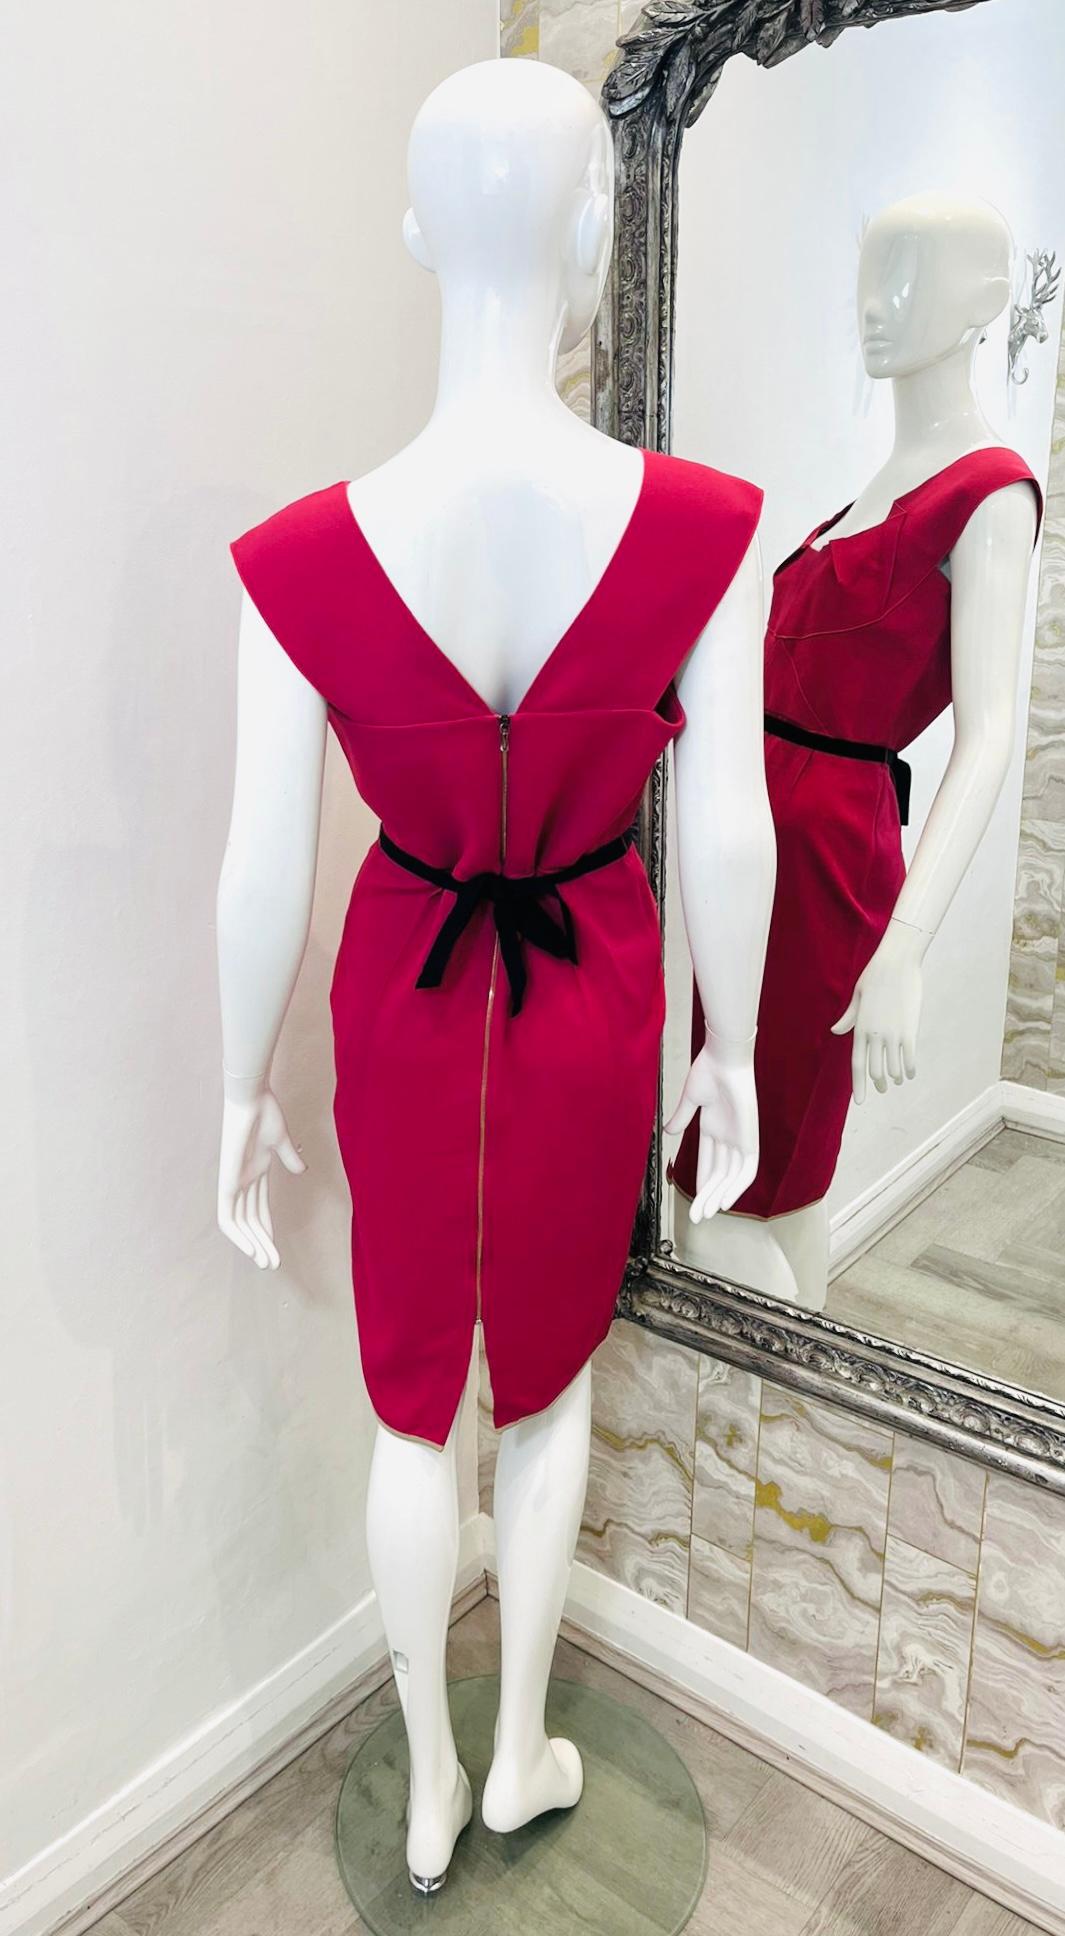  Roland Mouret For Selfridges Pencil Dress In Excellent Condition For Sale In London, GB